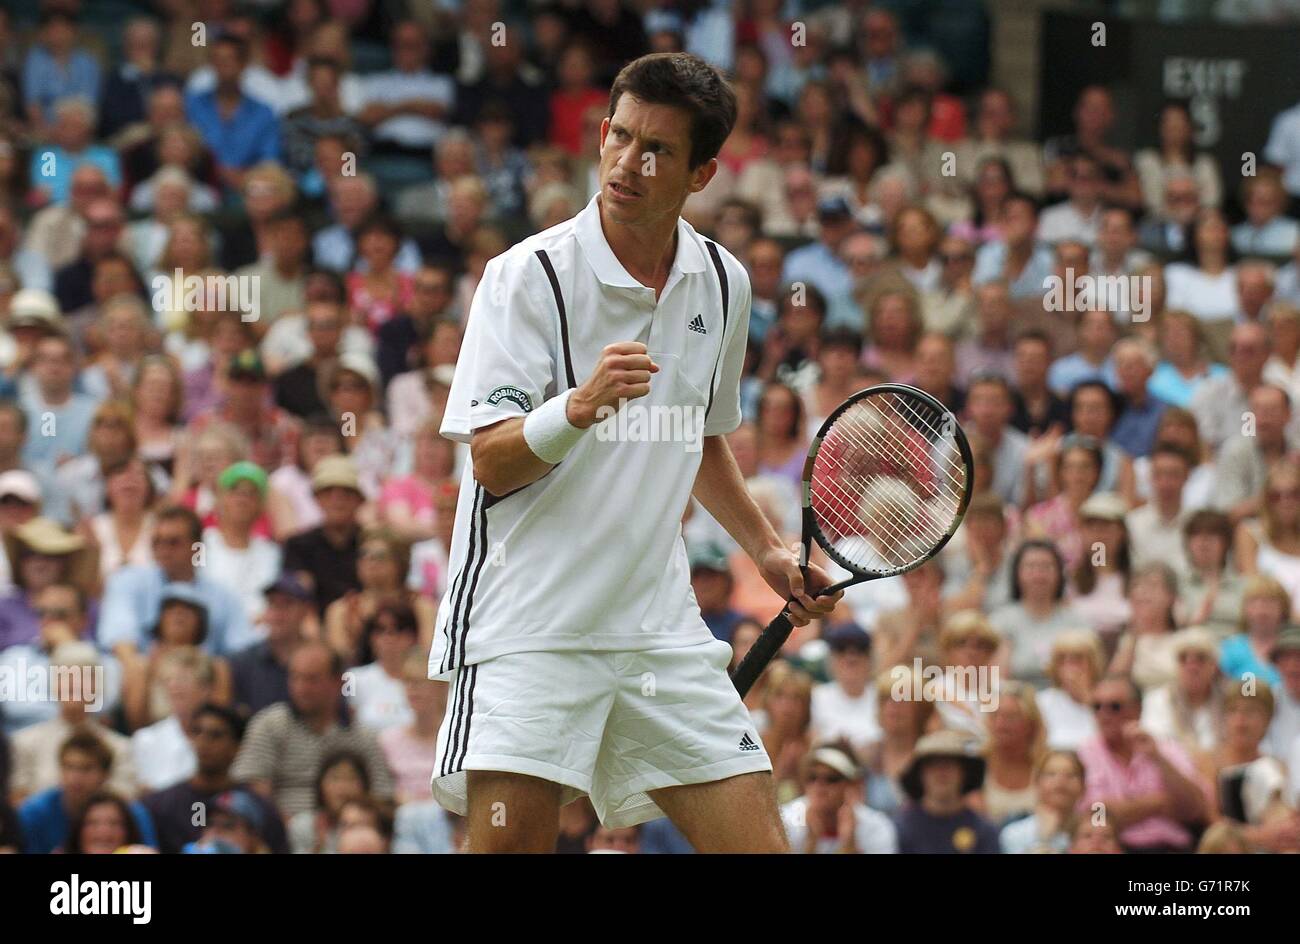 Great Britain's Tim Henman clenches his fist during his match against Ivo Heuberger from Switzerland at The Lawn Tennis Championships in Wimbledon, London. Henman won the match in straight sets 7:5/6:3/6:2. EDITORIAL USE ONLY, NO MOBILE PHONE USE. Stock Photo